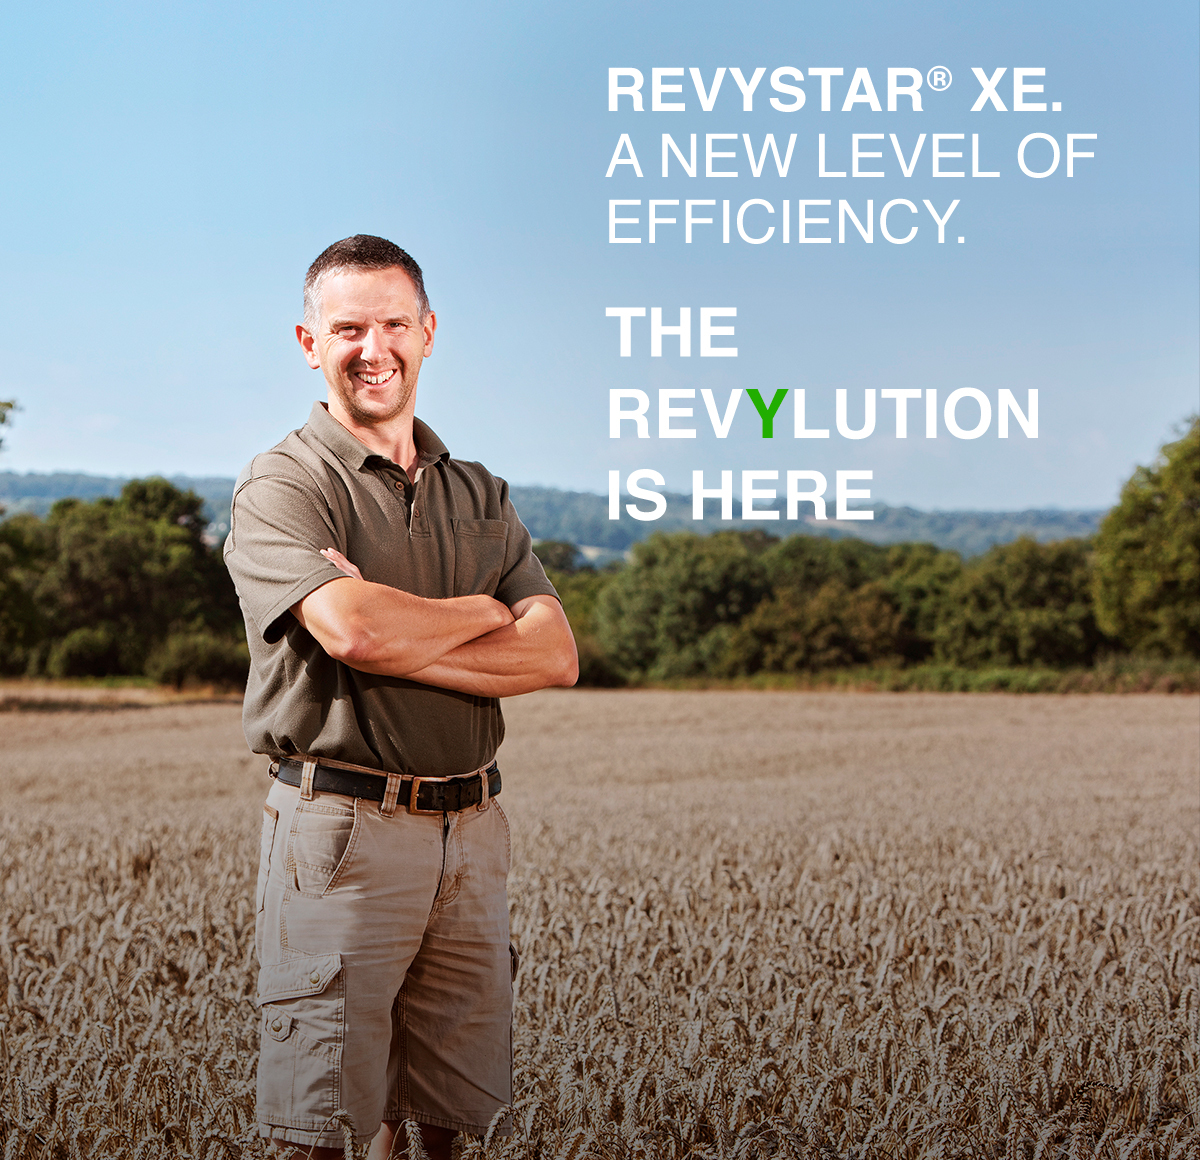 Revystar XE. A new level of efficiency. The Revylution is here